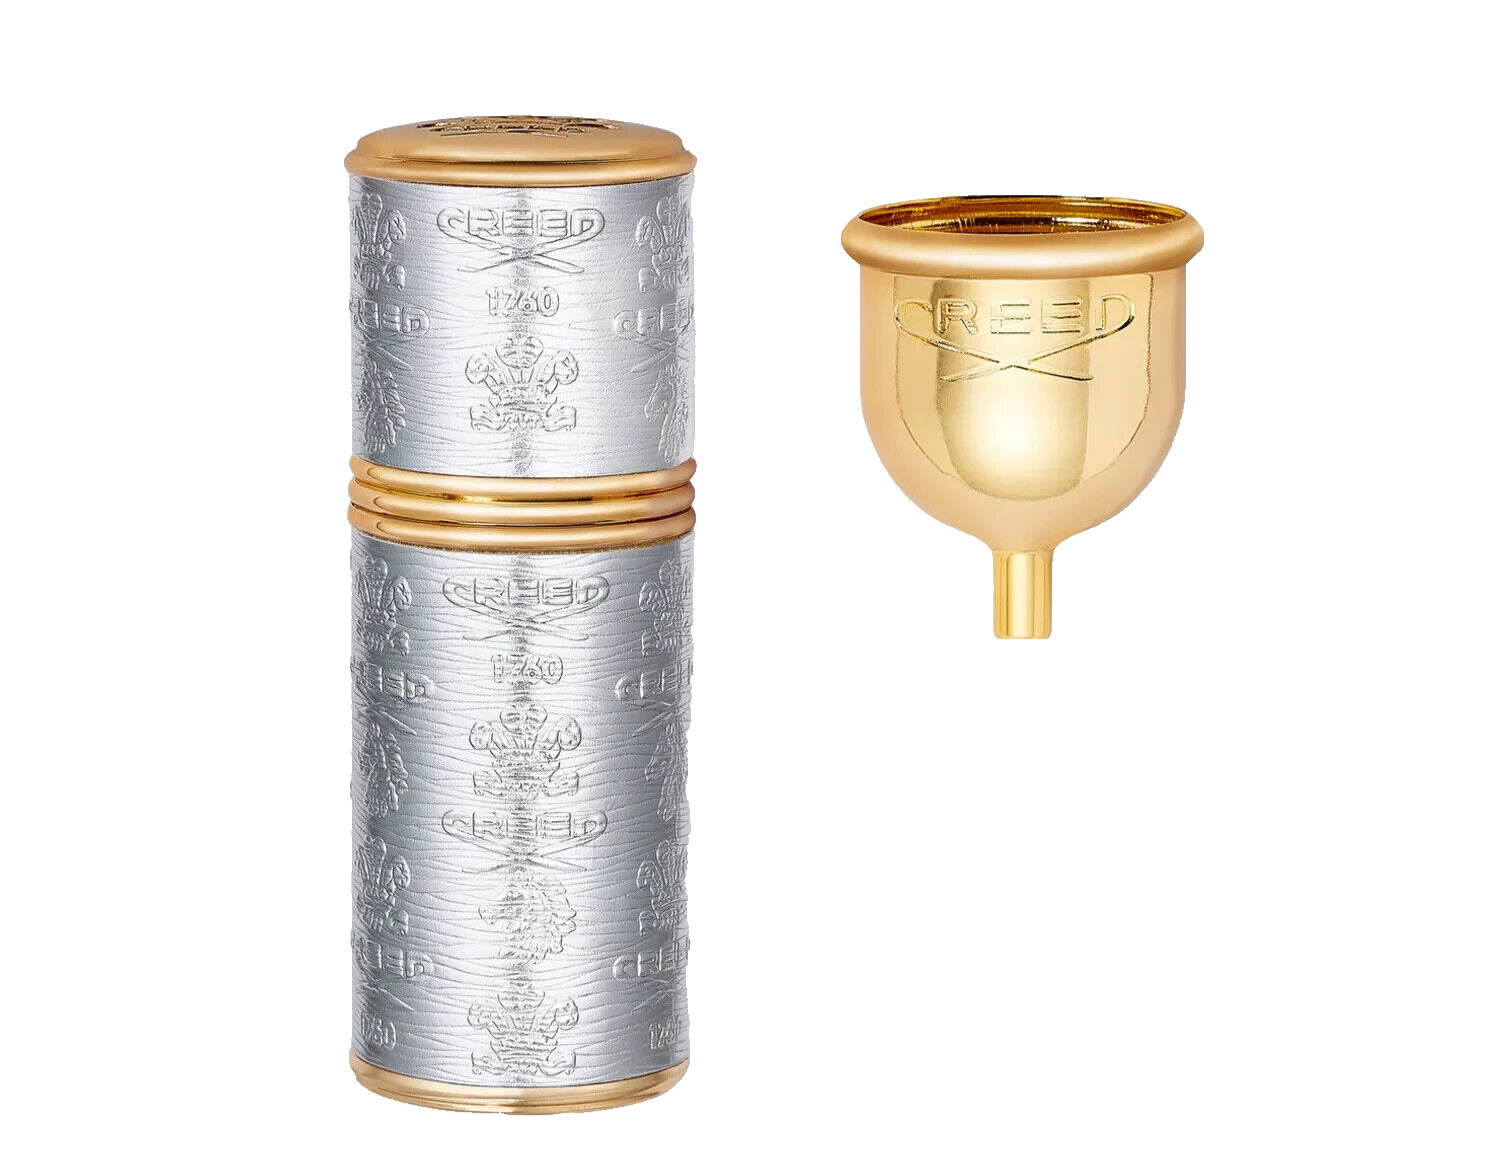 CREED 1.7 oz / 50 ml Gold Trim/Silver Leather Atomizer - MSRP $250.00